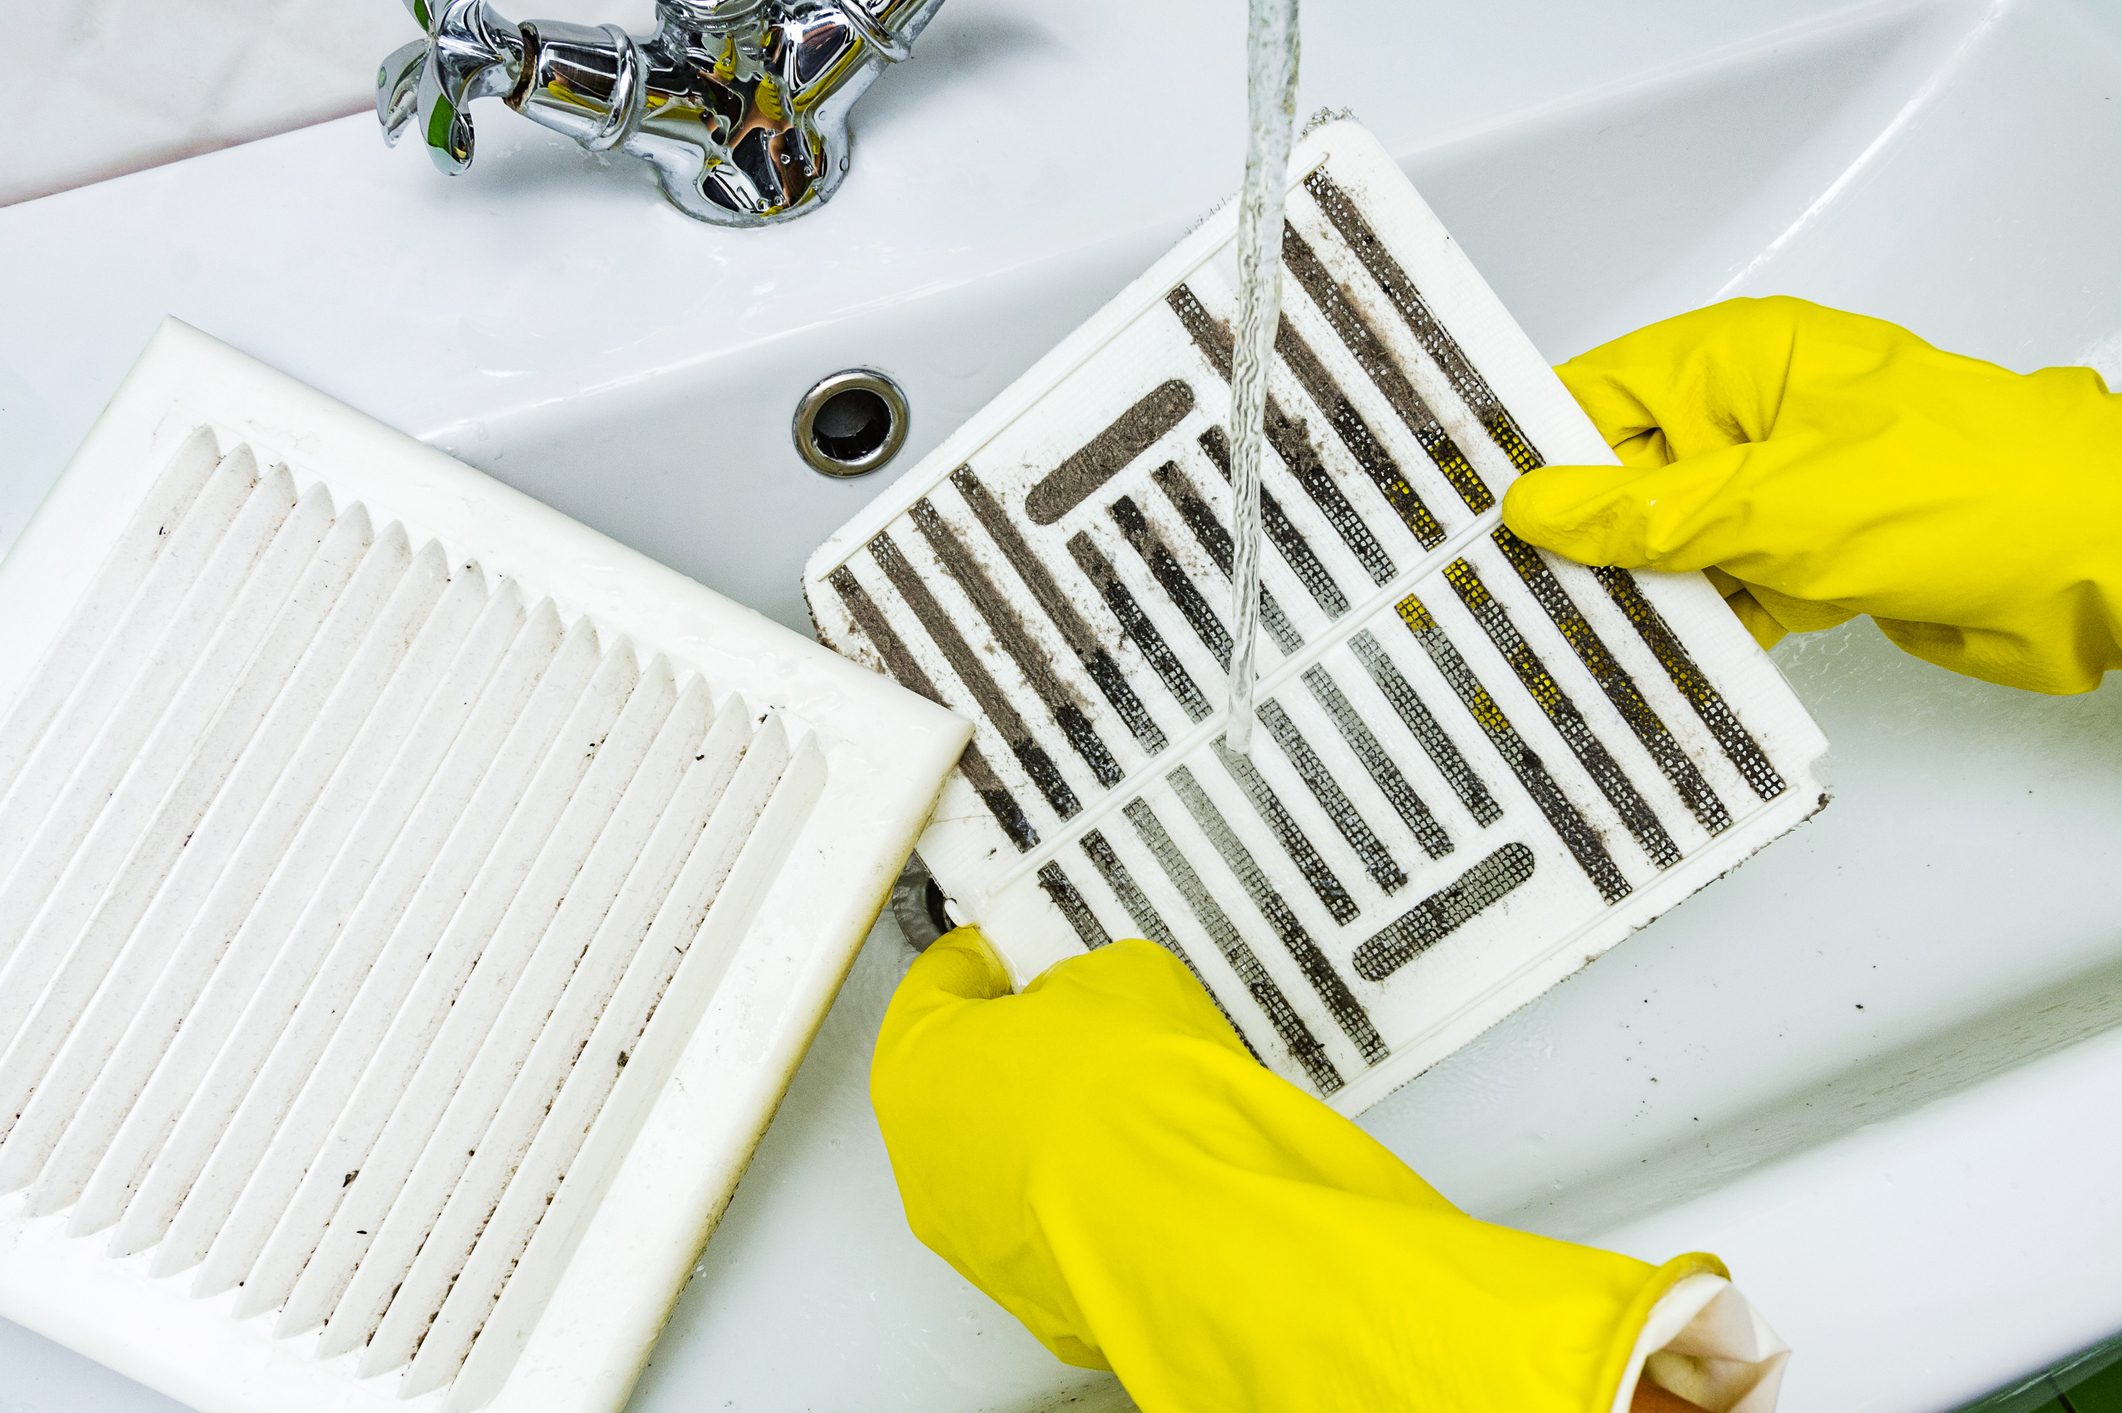 Person in a protective rubber glove washes a dusty bathroom vent in the sink